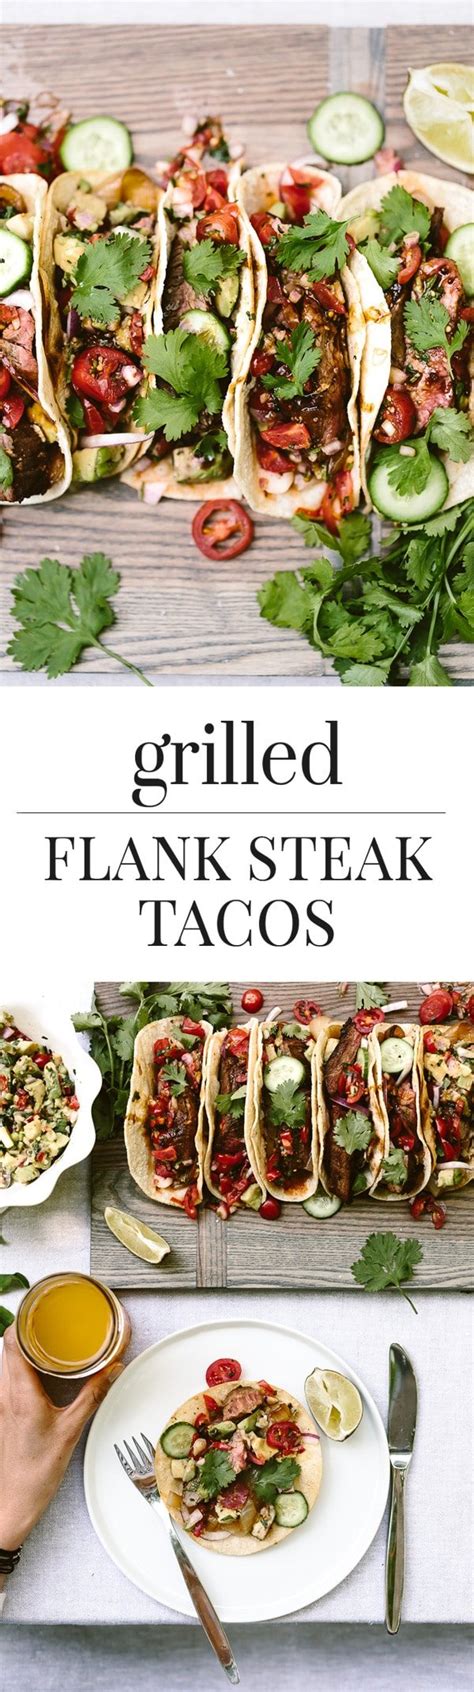 Grilled Flank Steak Tacos Foolproof Living